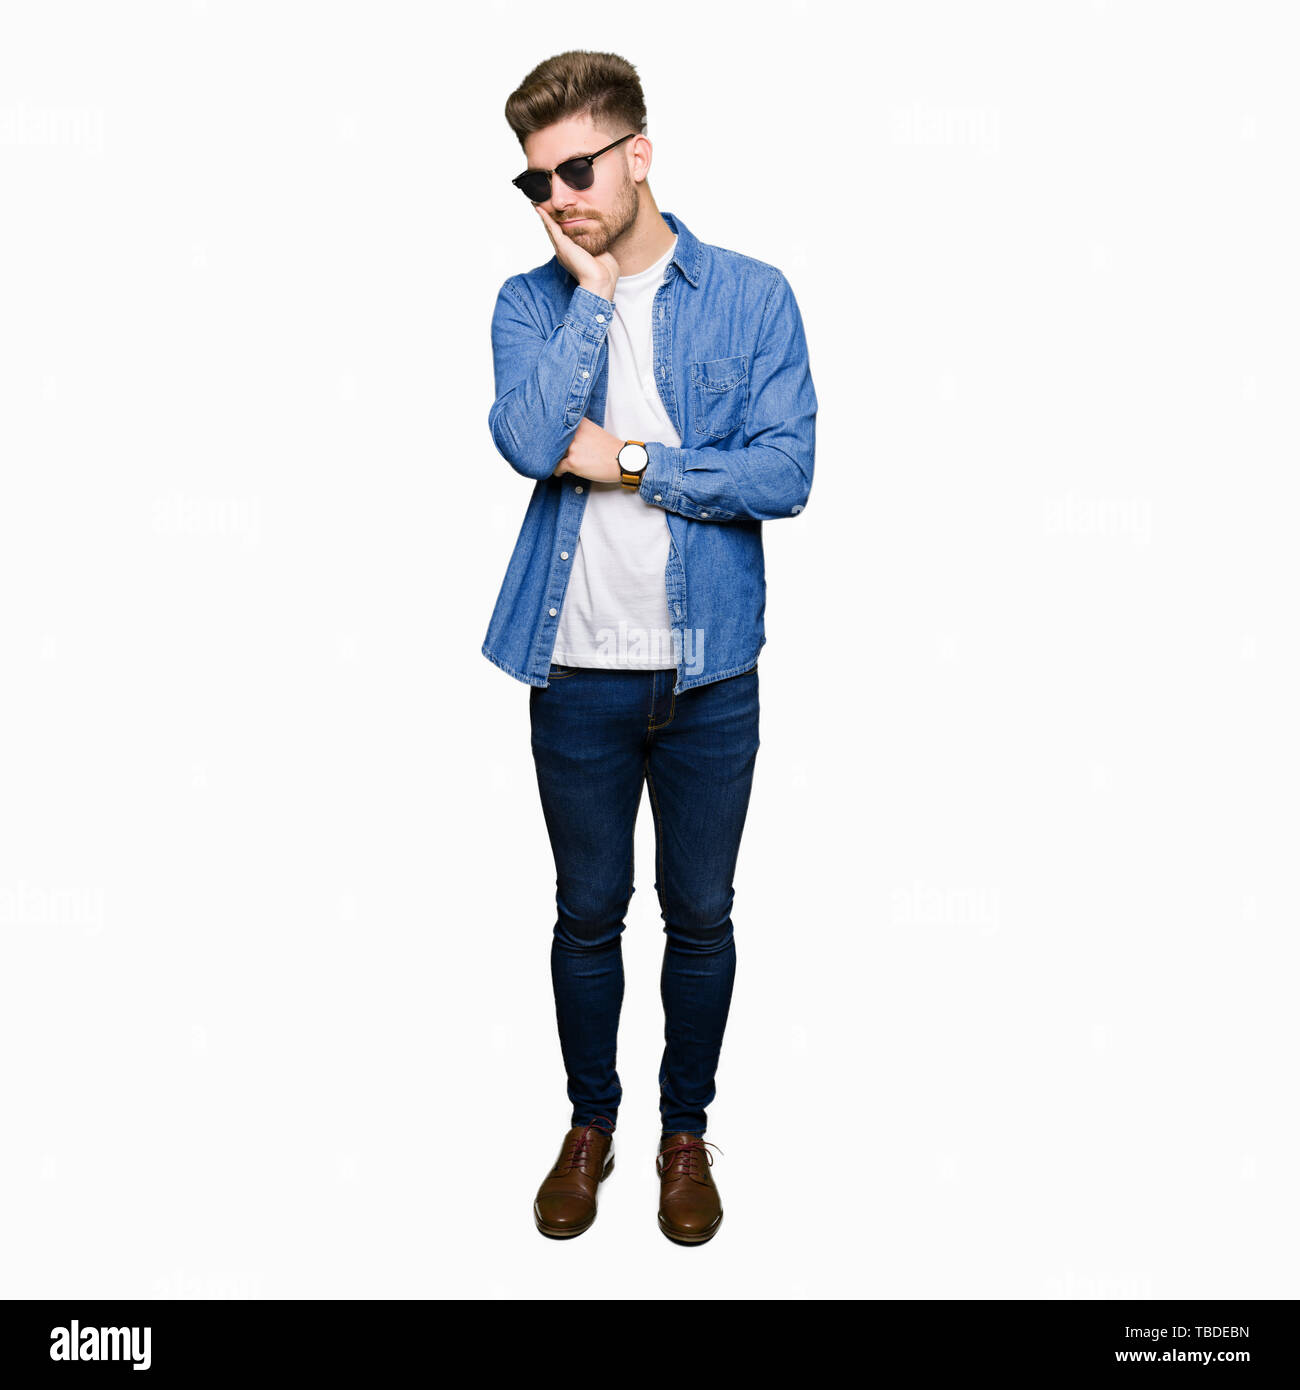 Young handsome elegant man wearing denim jacket thinking looking tired and bored with depression problems with crossed arms. Stock Photo